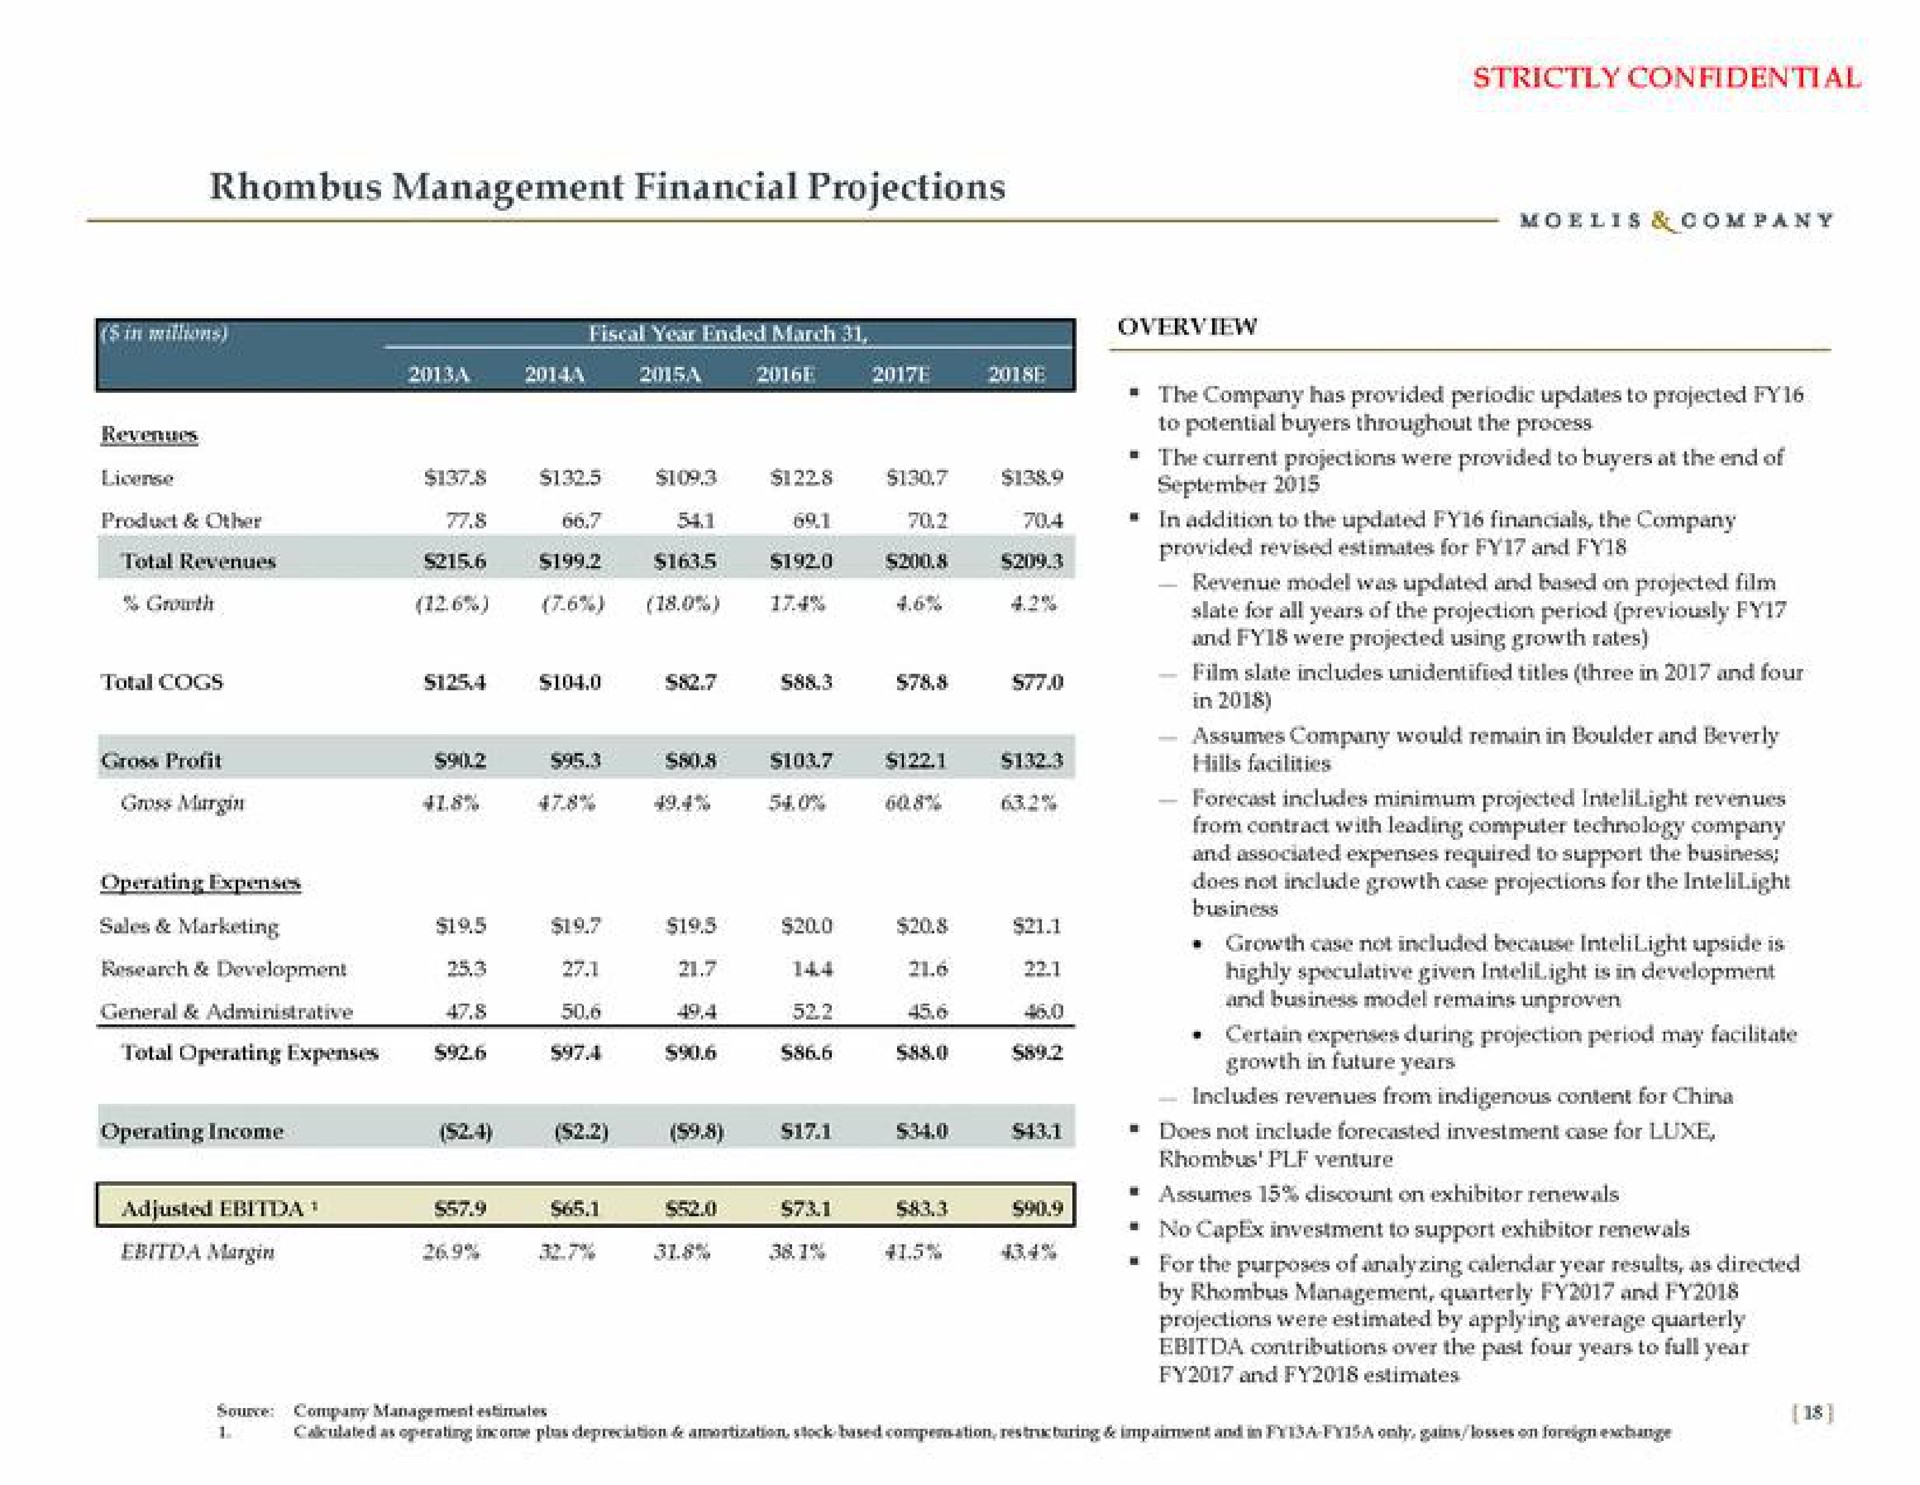 rhombus management financial projections license general administrative che | Moelis & Company